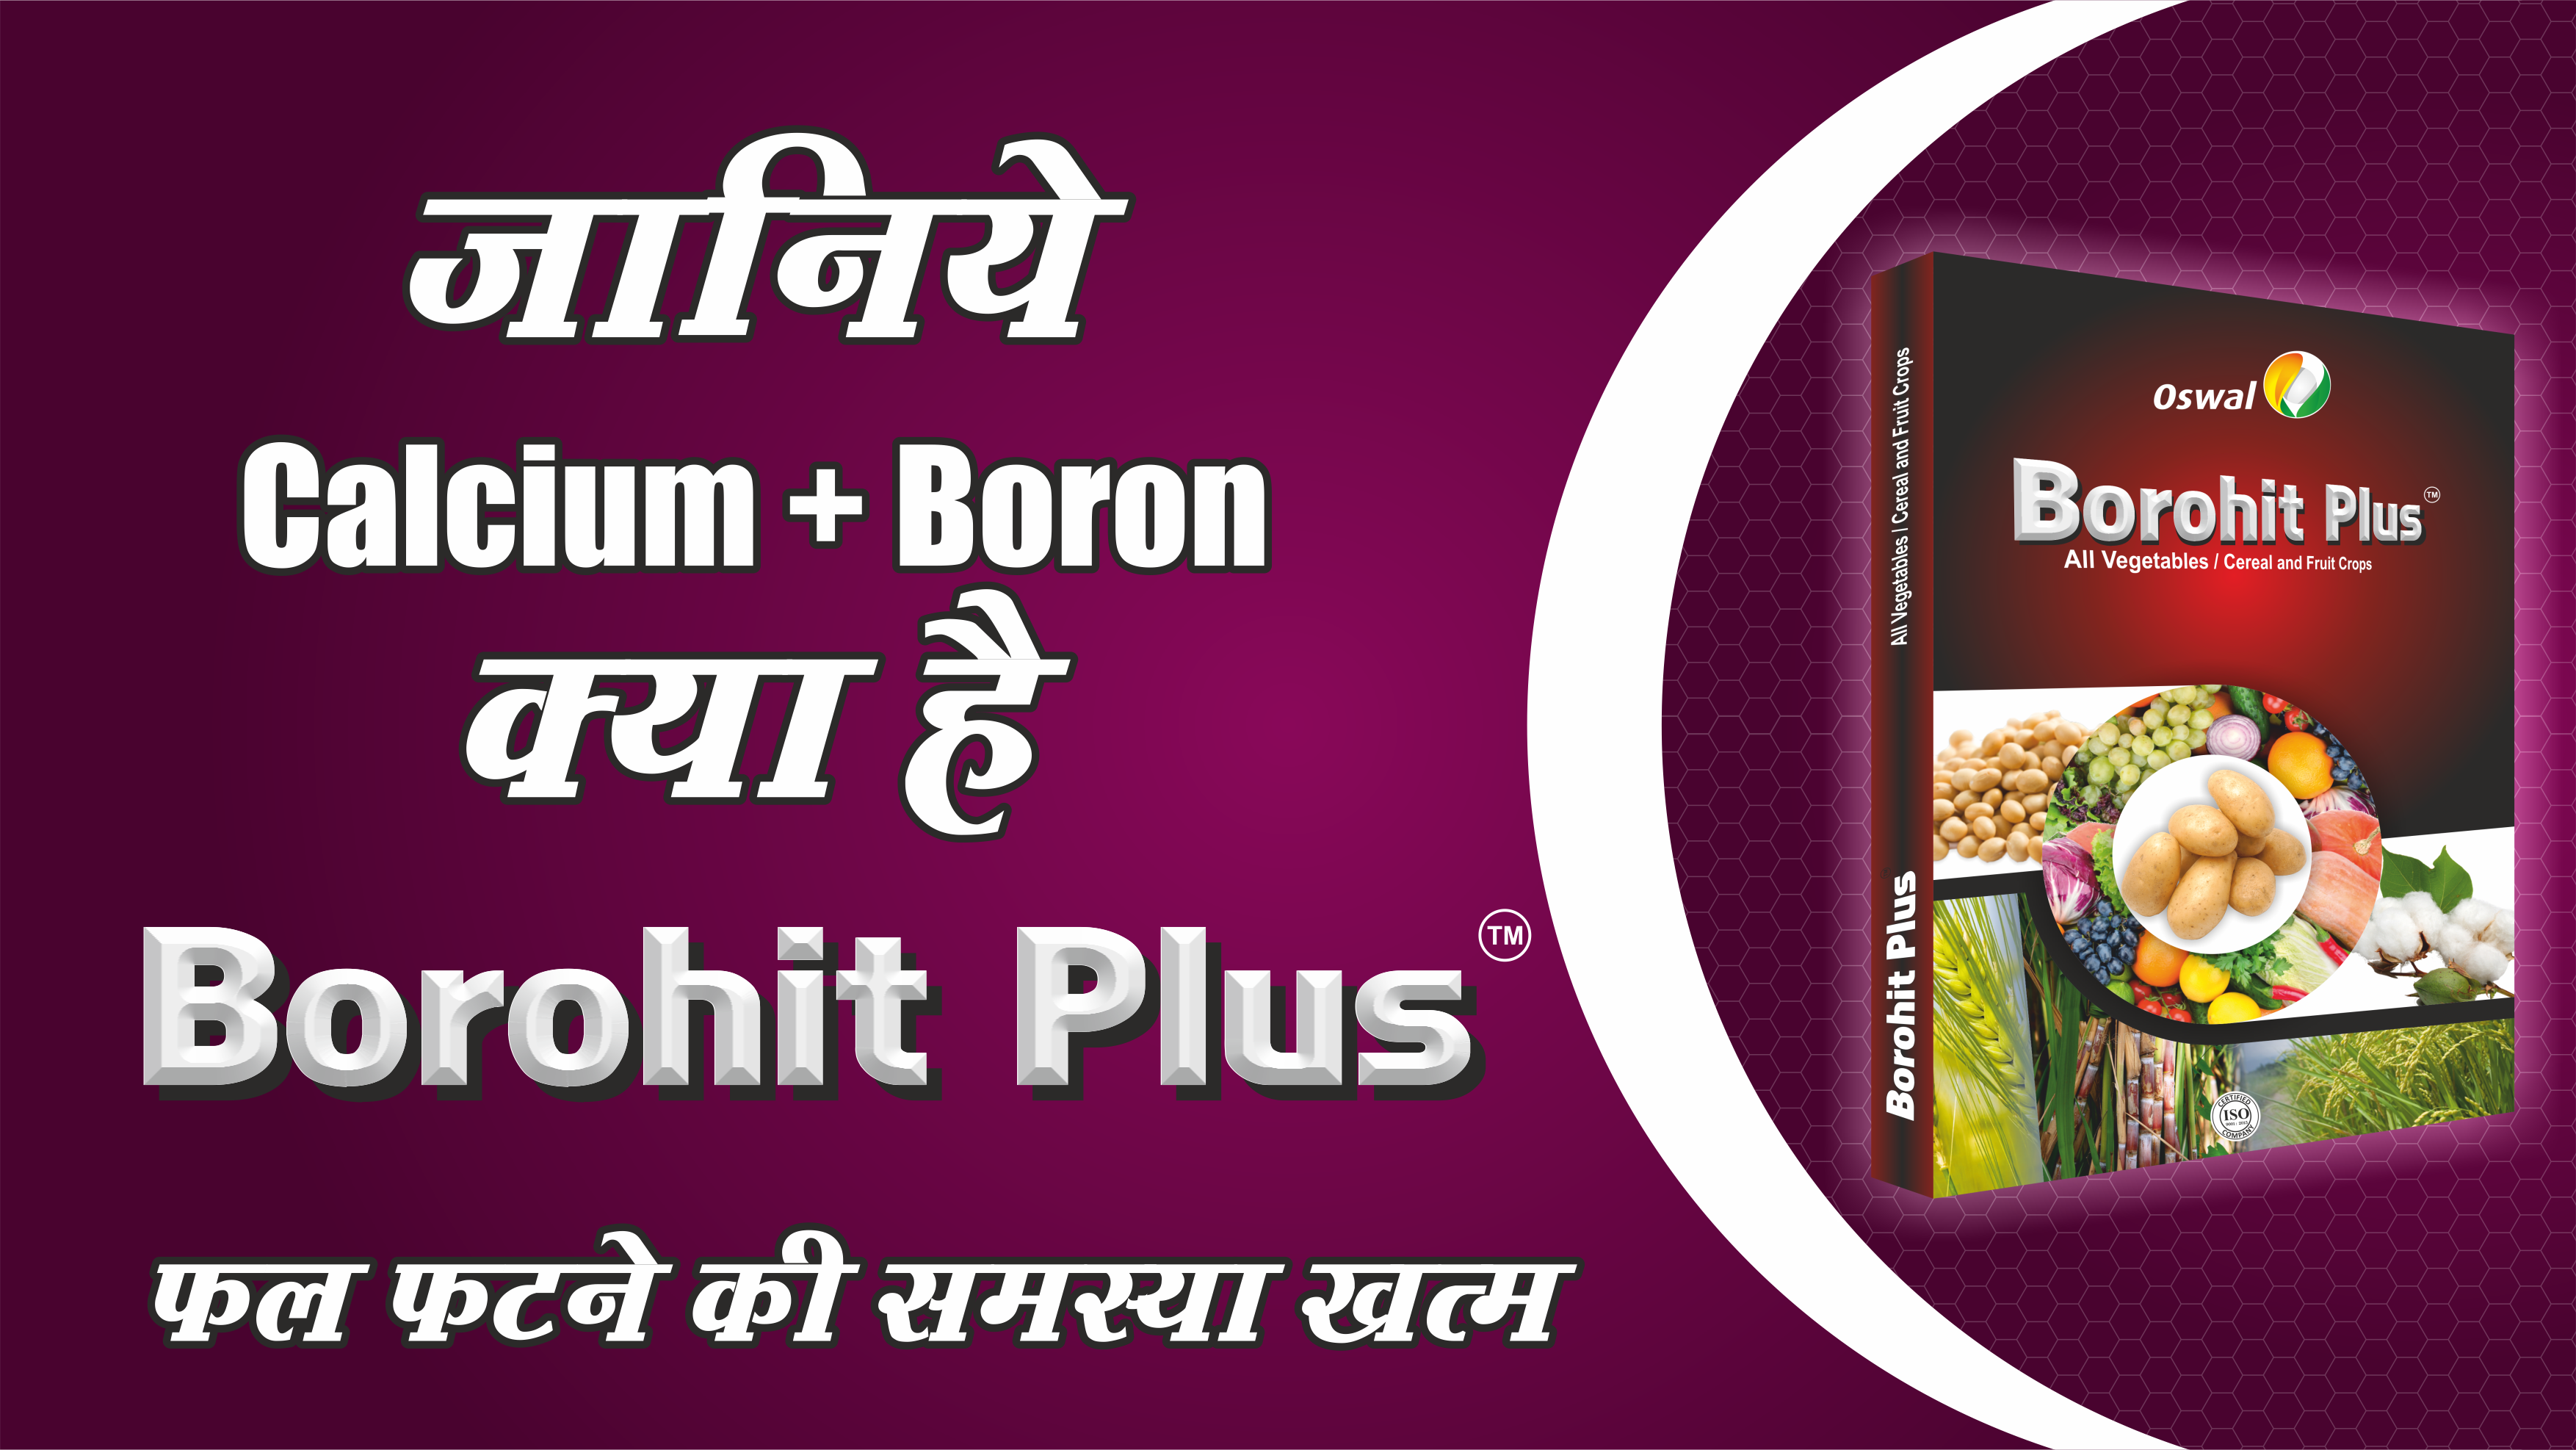 Borohit Plus - All Vegetables & Cereal and Fruit Crops